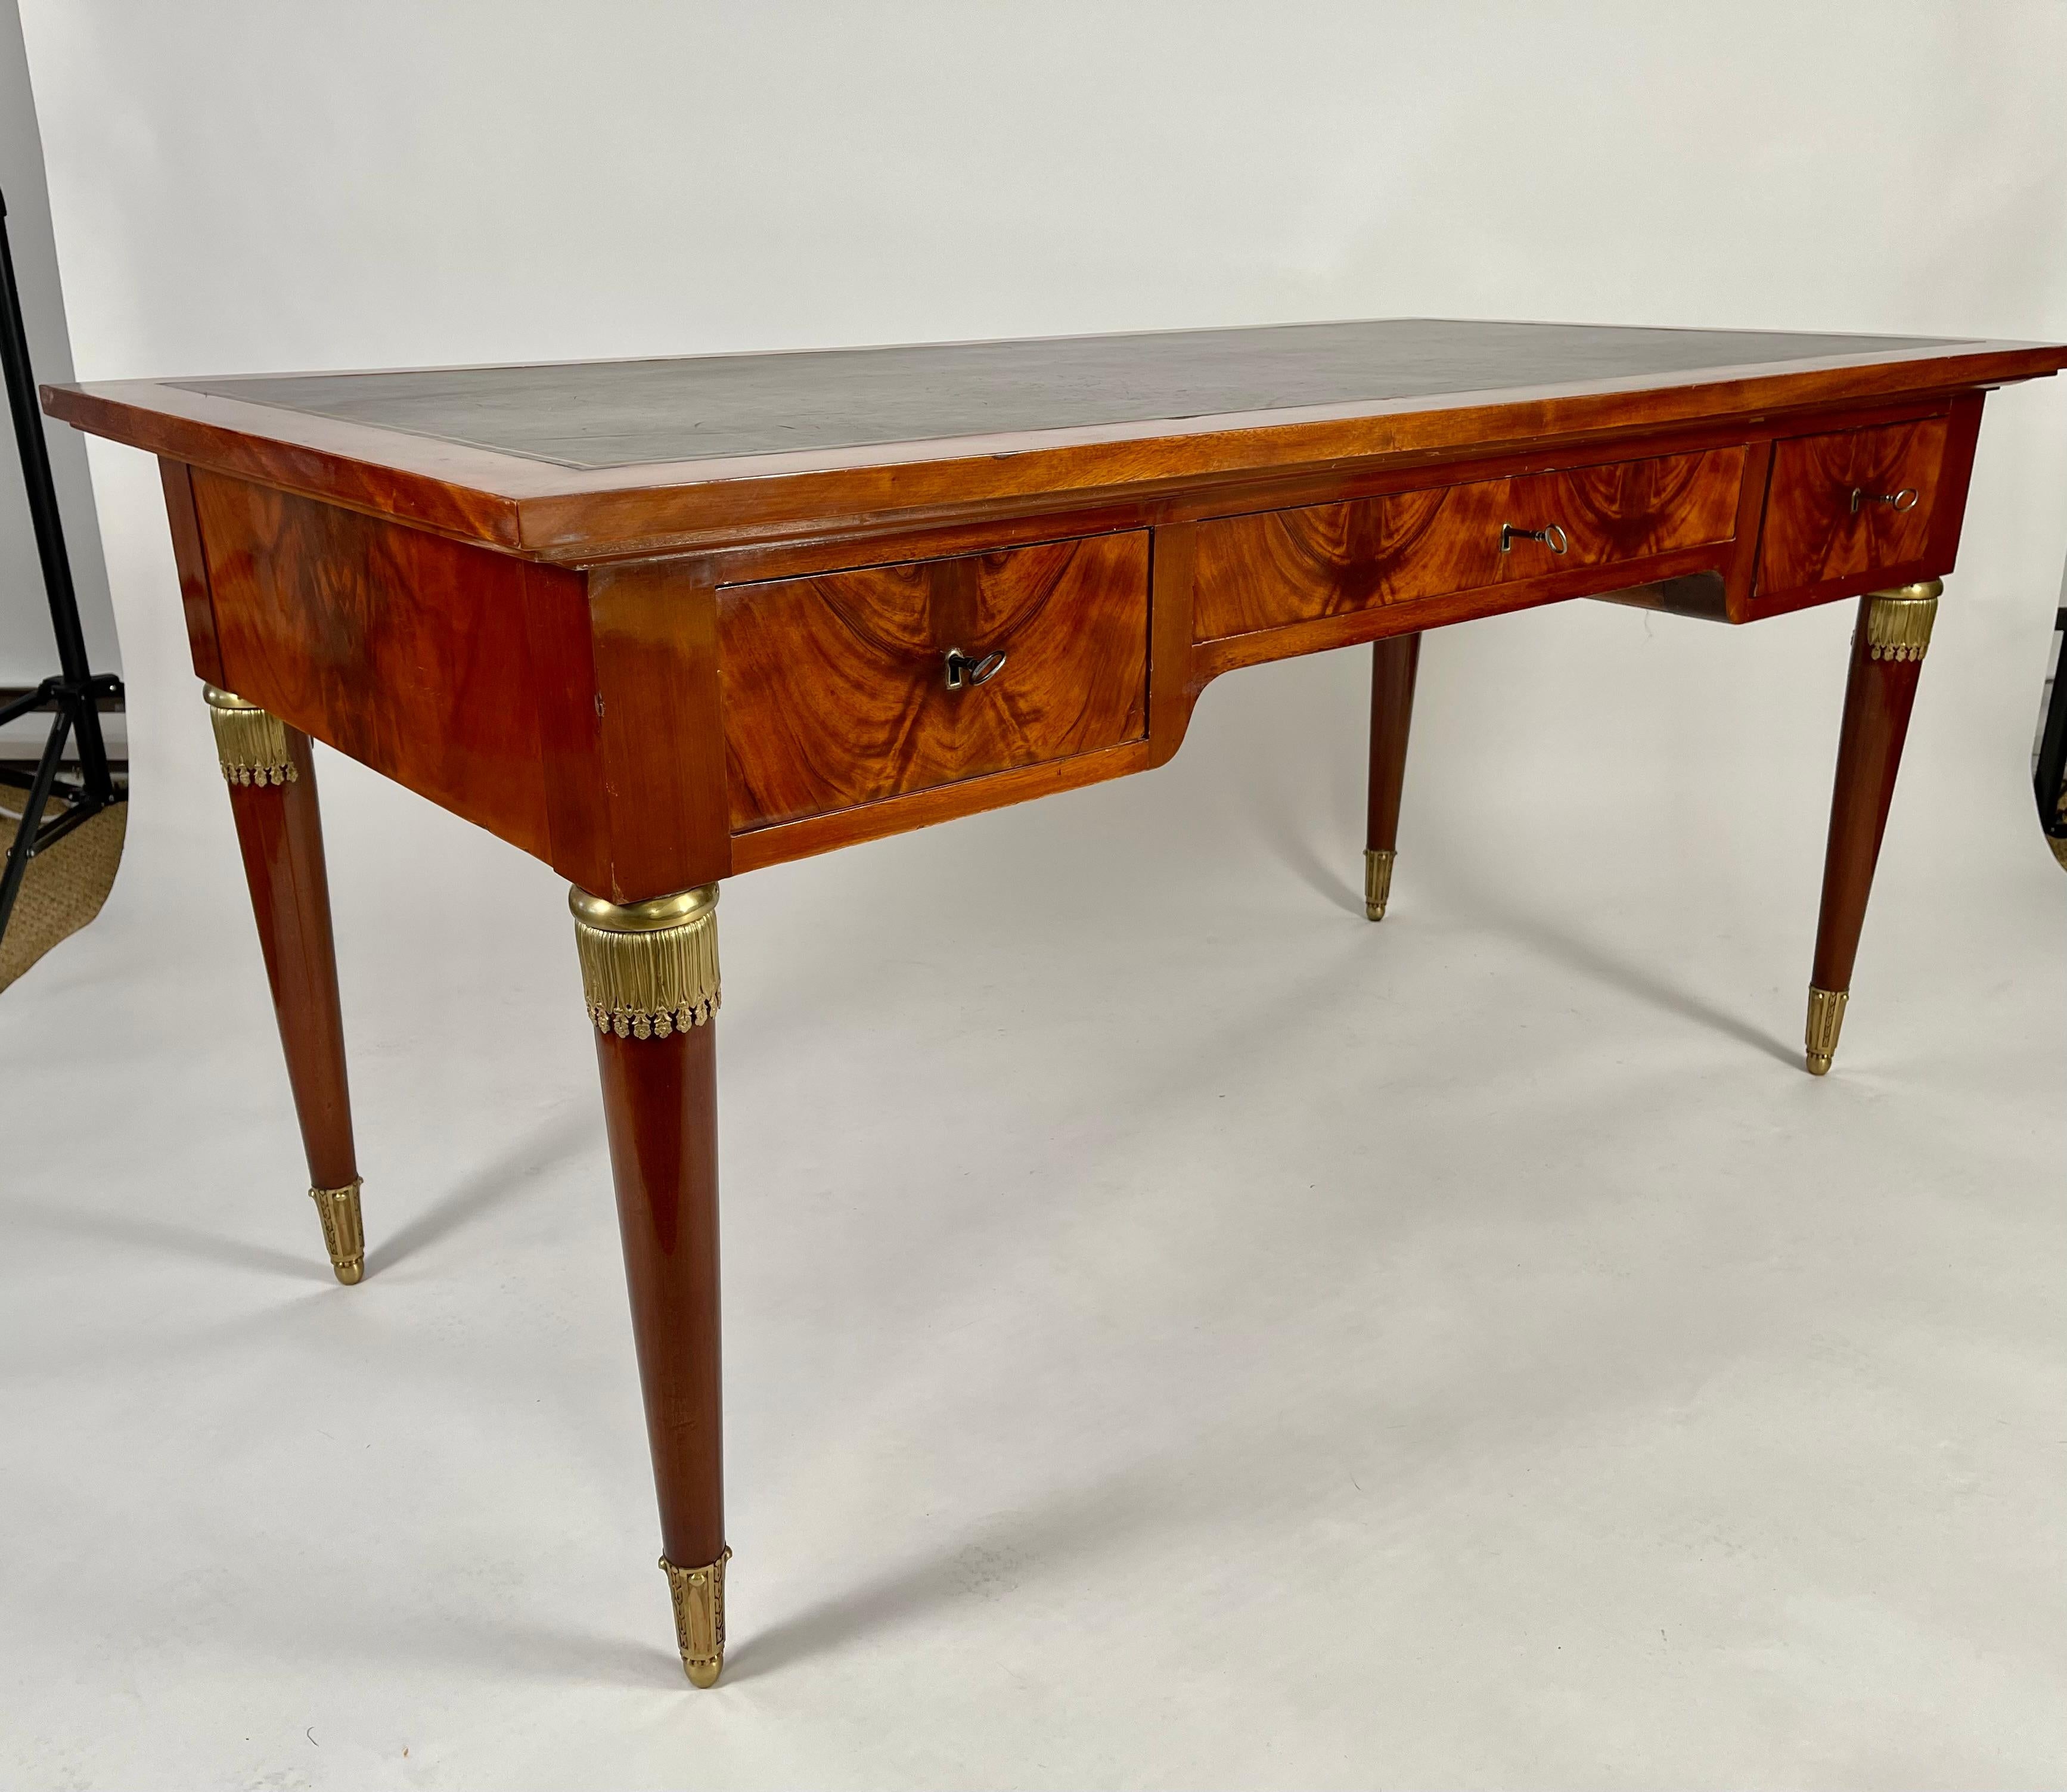 20th Century French Neoclassical Empire Style Mahogany Leather Top Desk